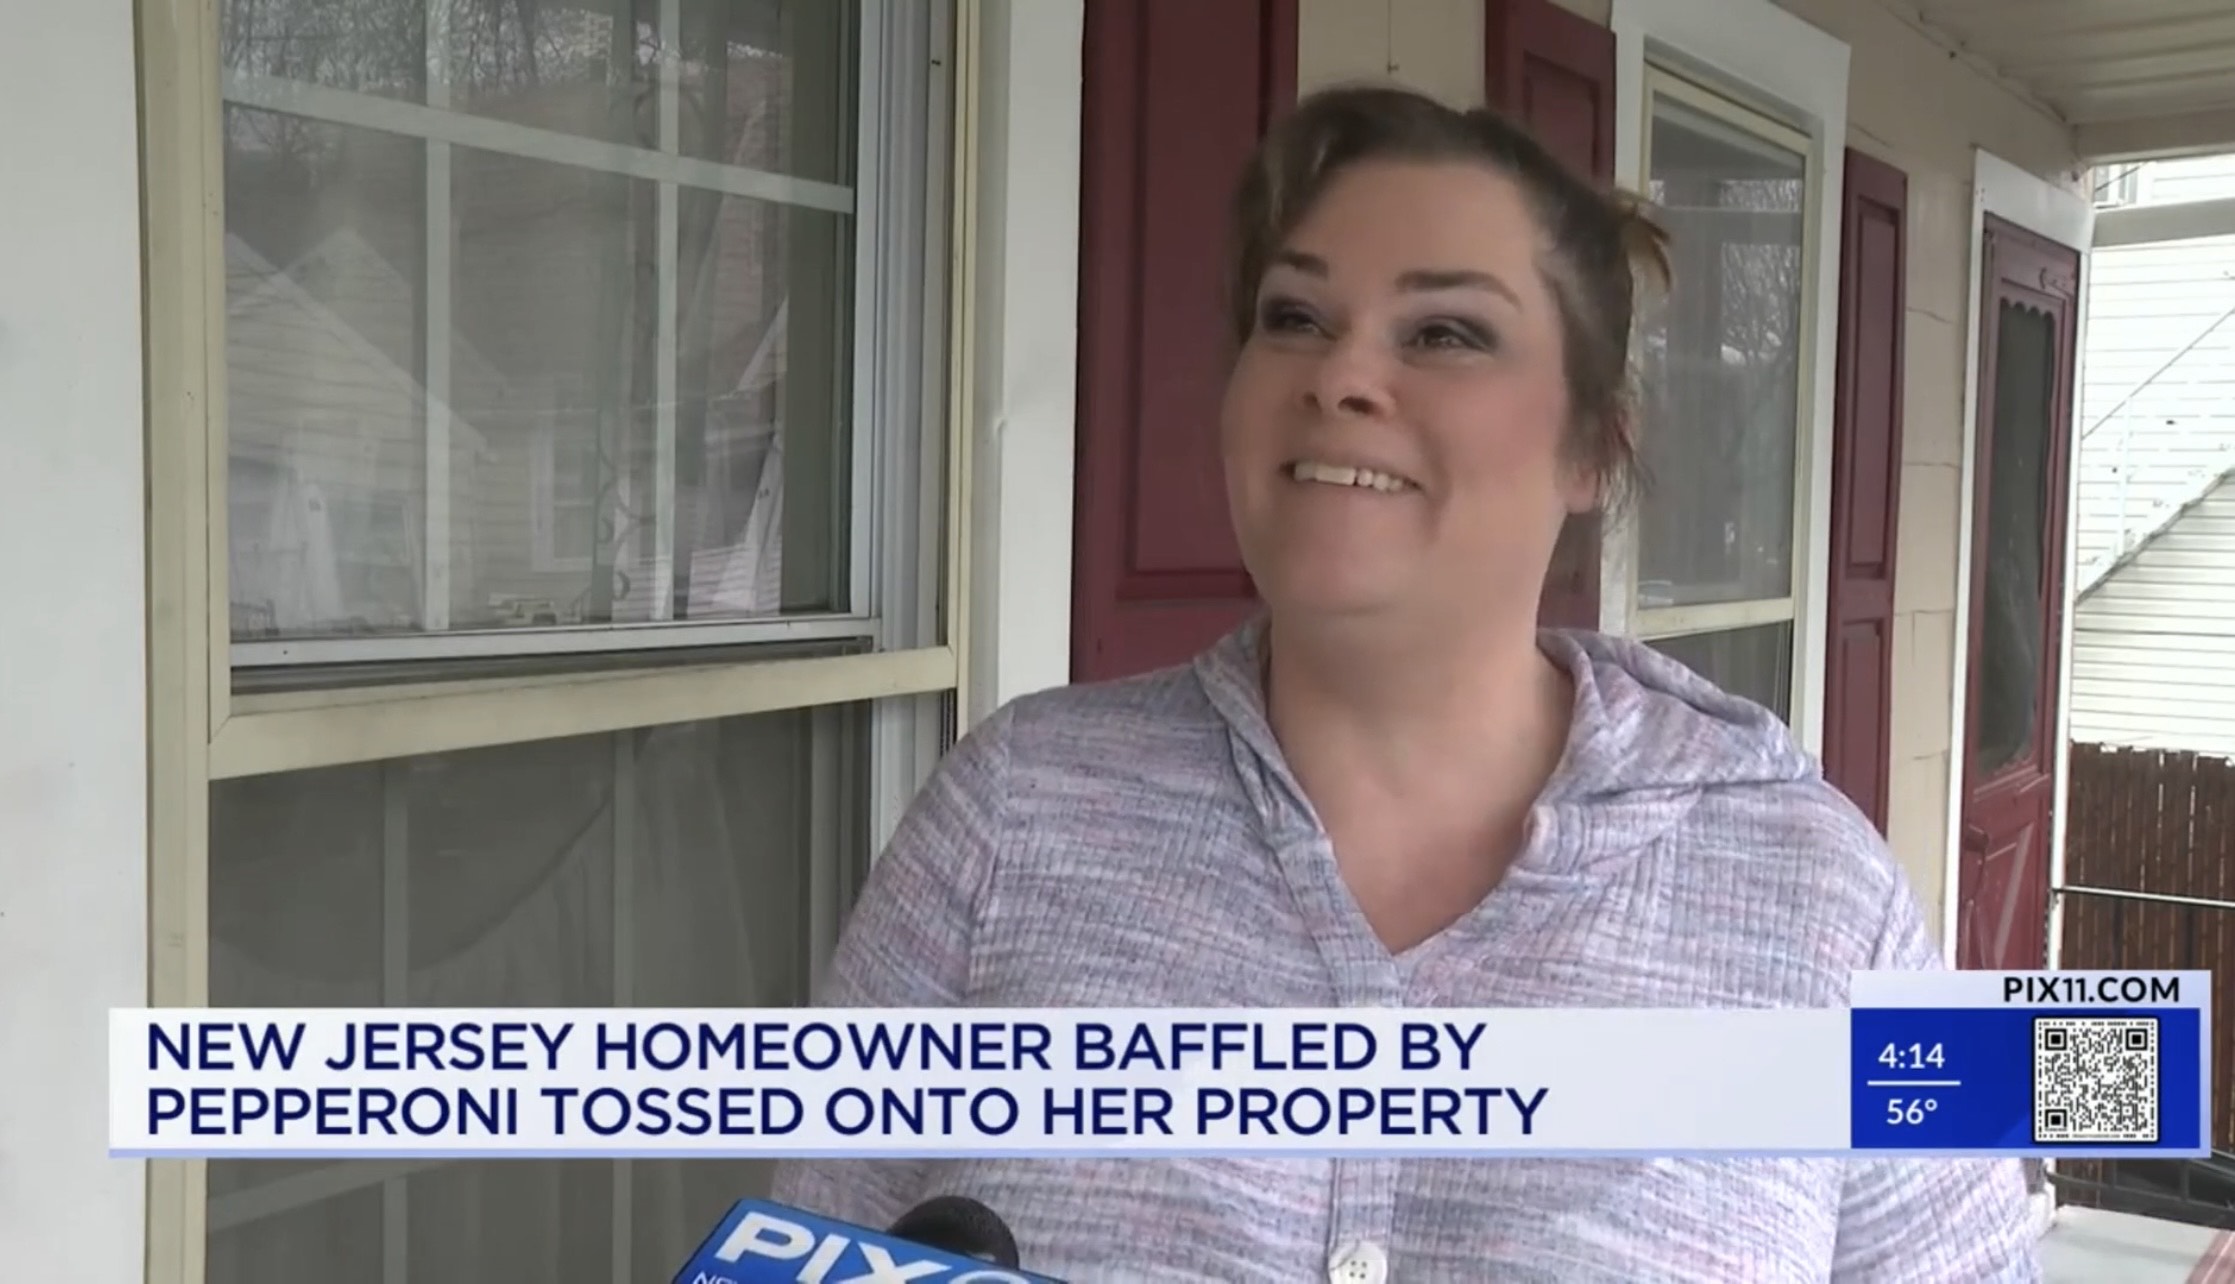 New Jersey Homeowner Baffled By Pepperoni Tossed Onto Her Property